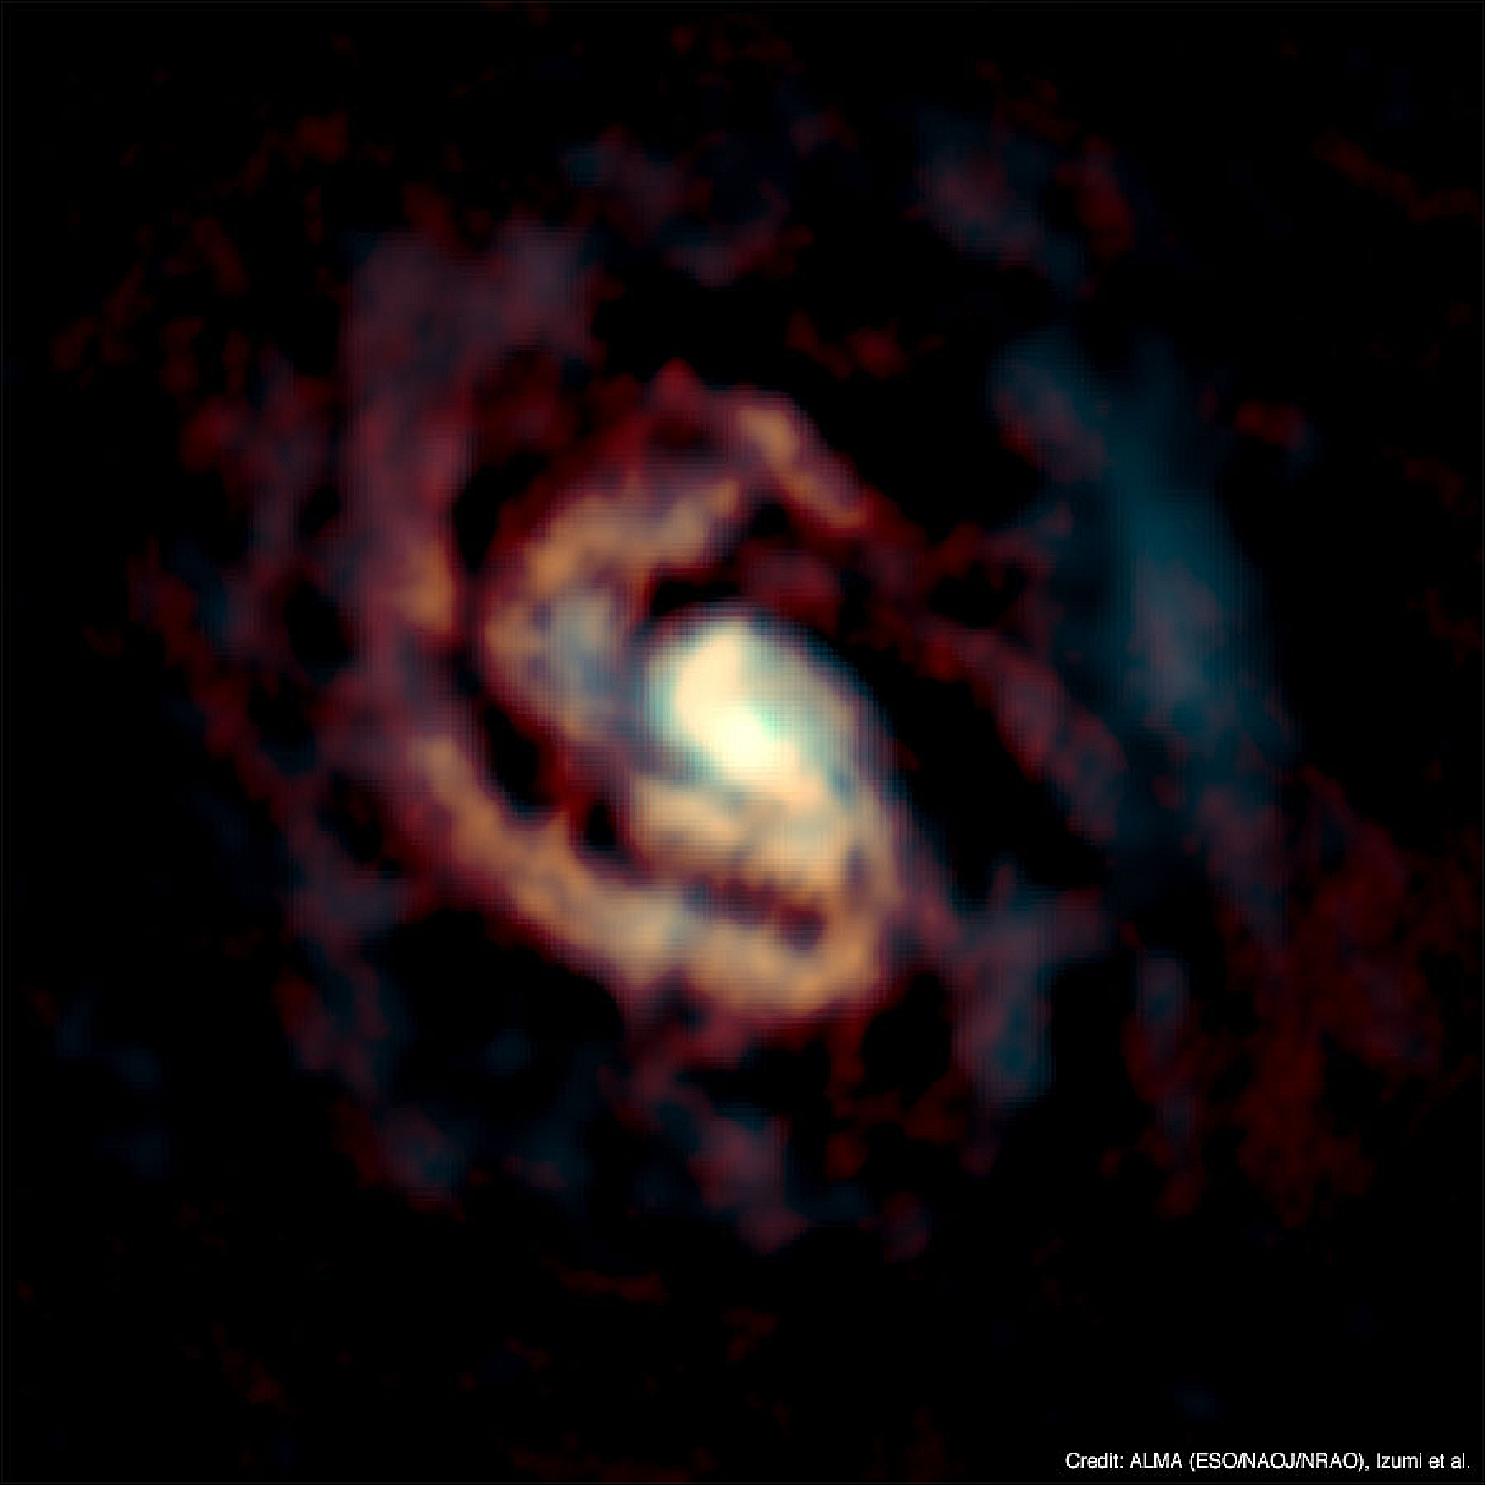 Figure 5: ALMA image of the gas around the supermassive black hole in the center of the Circinus Galaxy. The distributions of CO molecular gas and C atomic gas are shown in orange and cyan, respectively [image credit: ALMA (ESO/NAOJ/NROA), Izumi et al.]